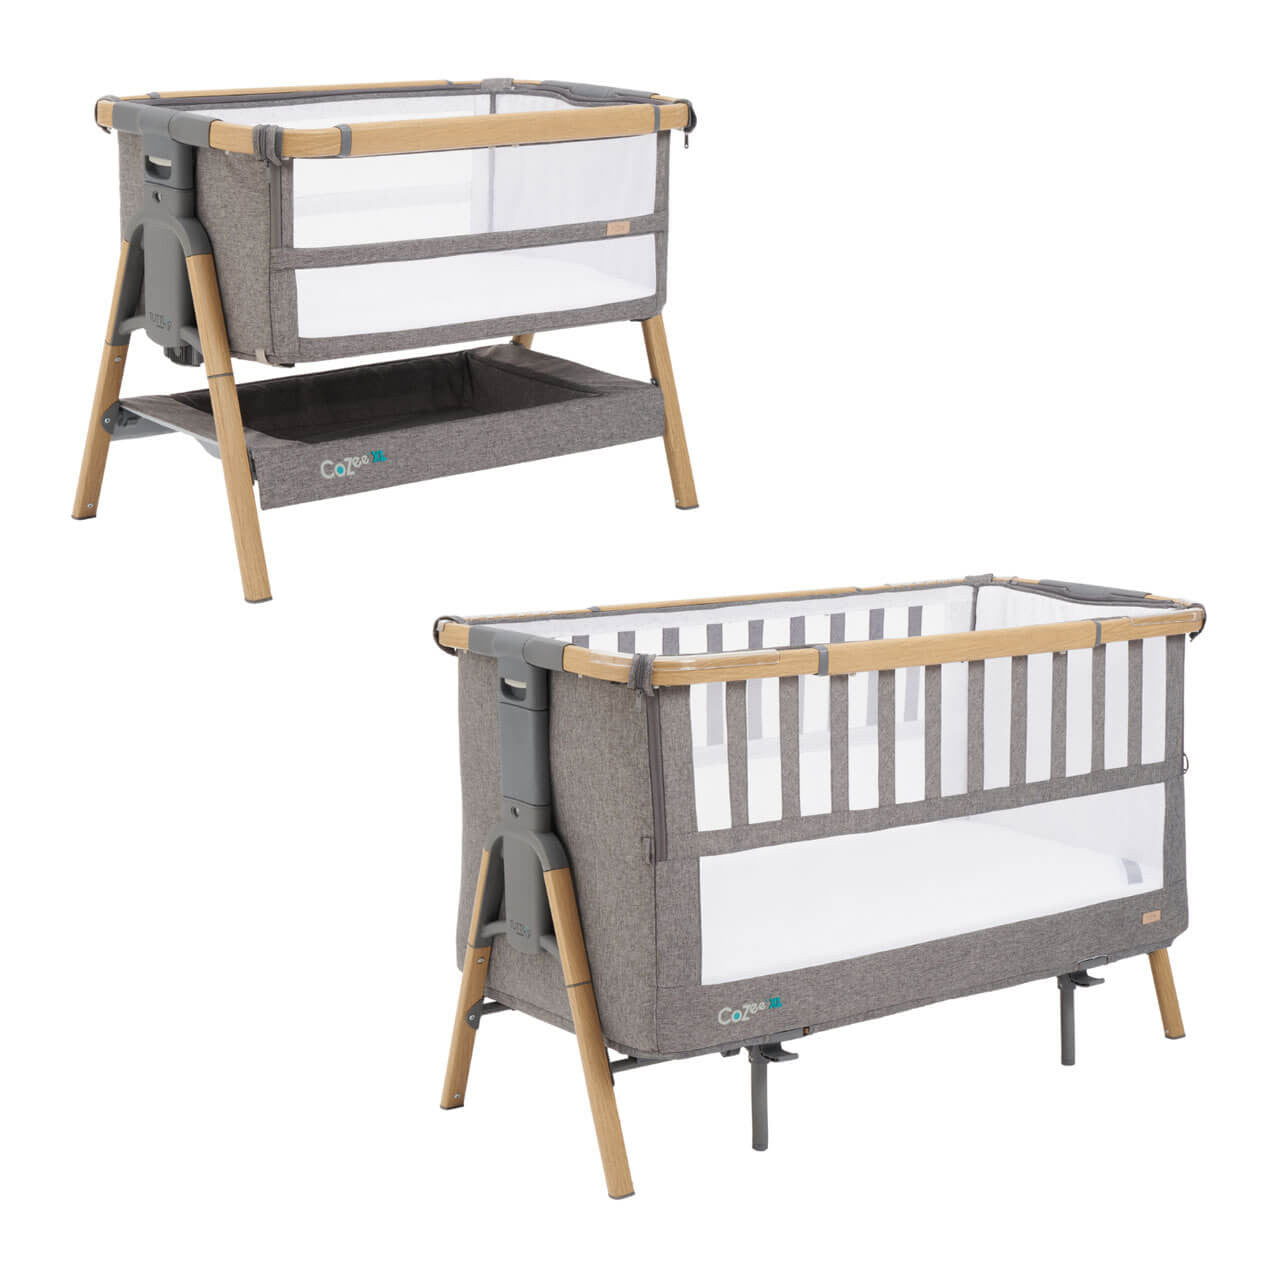 Tutti Bambini Cozee XL Bedside Crib & Cot - Oak / Charcoal - For Your Little One